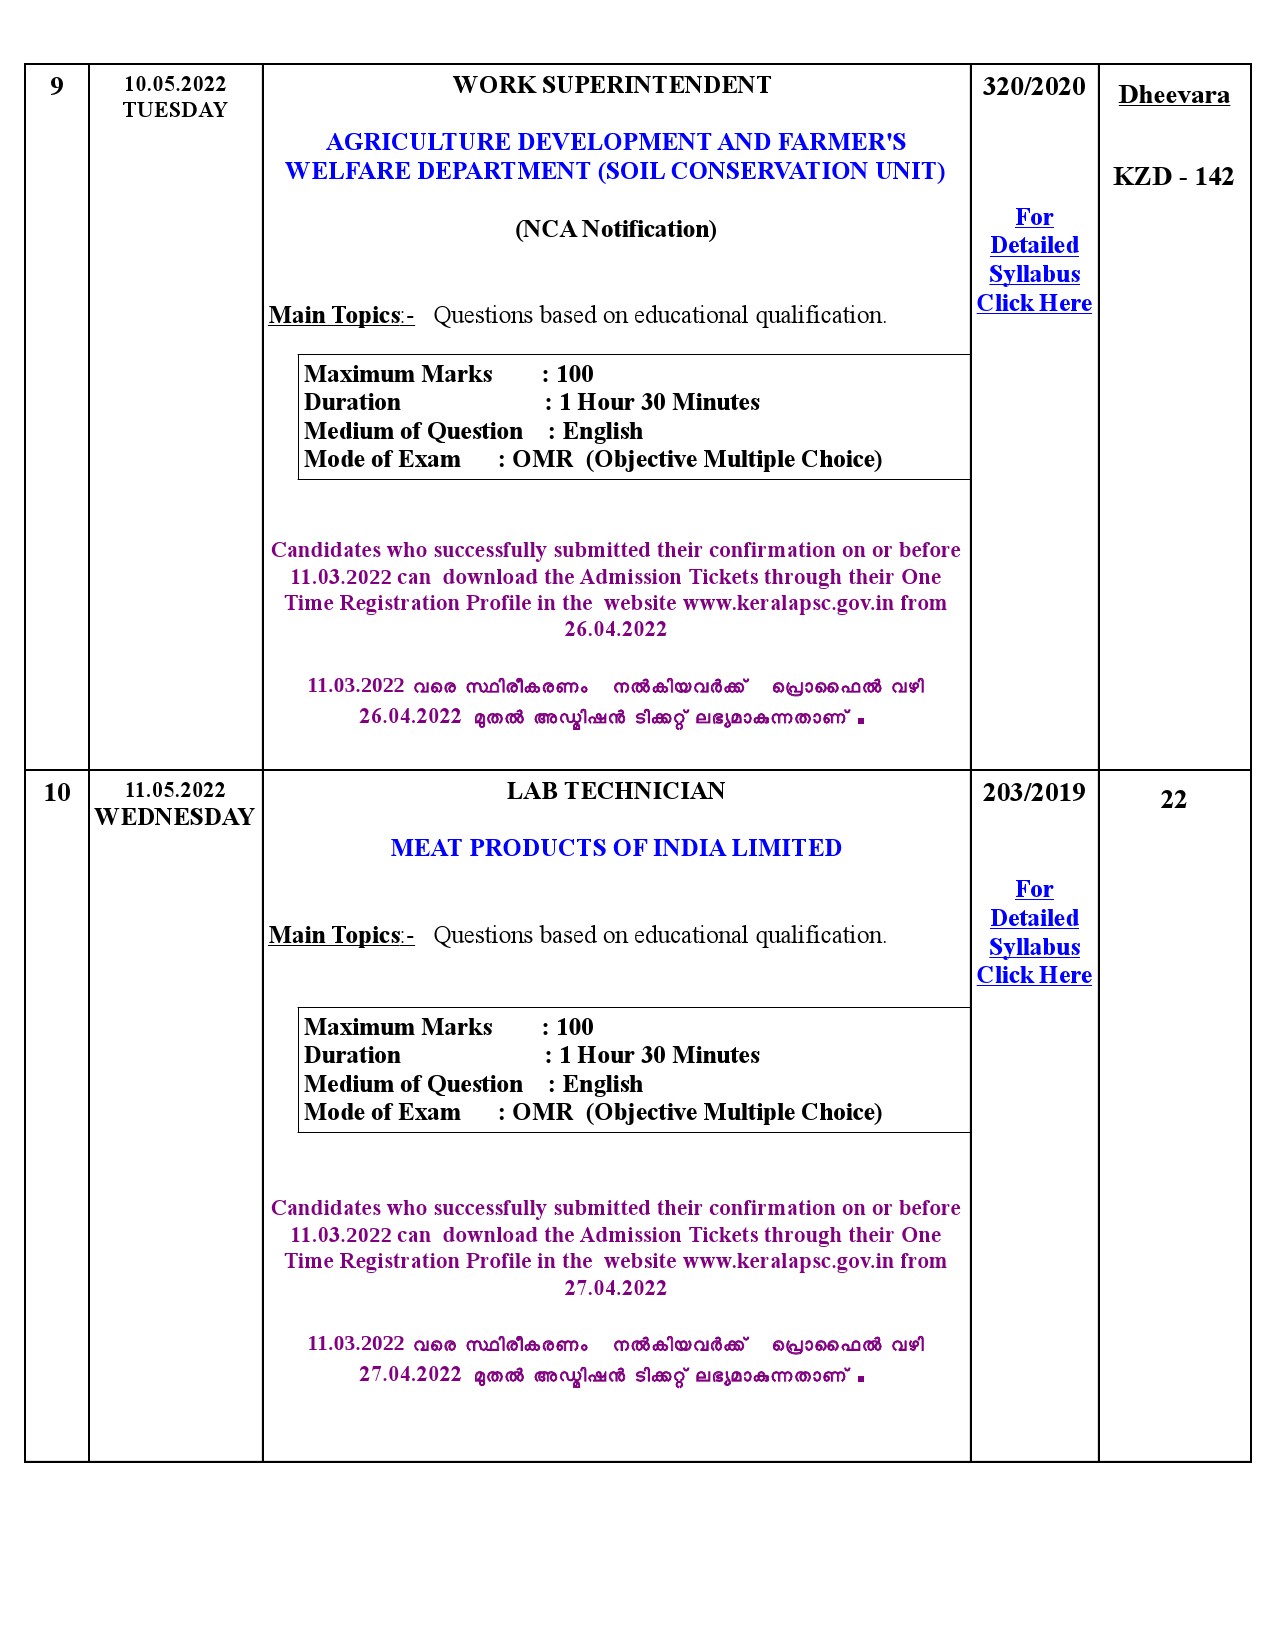 KPSC EXAMINATION PROGRAMME FOR THE MONTH OF MAY 2022 - Notification Image 5